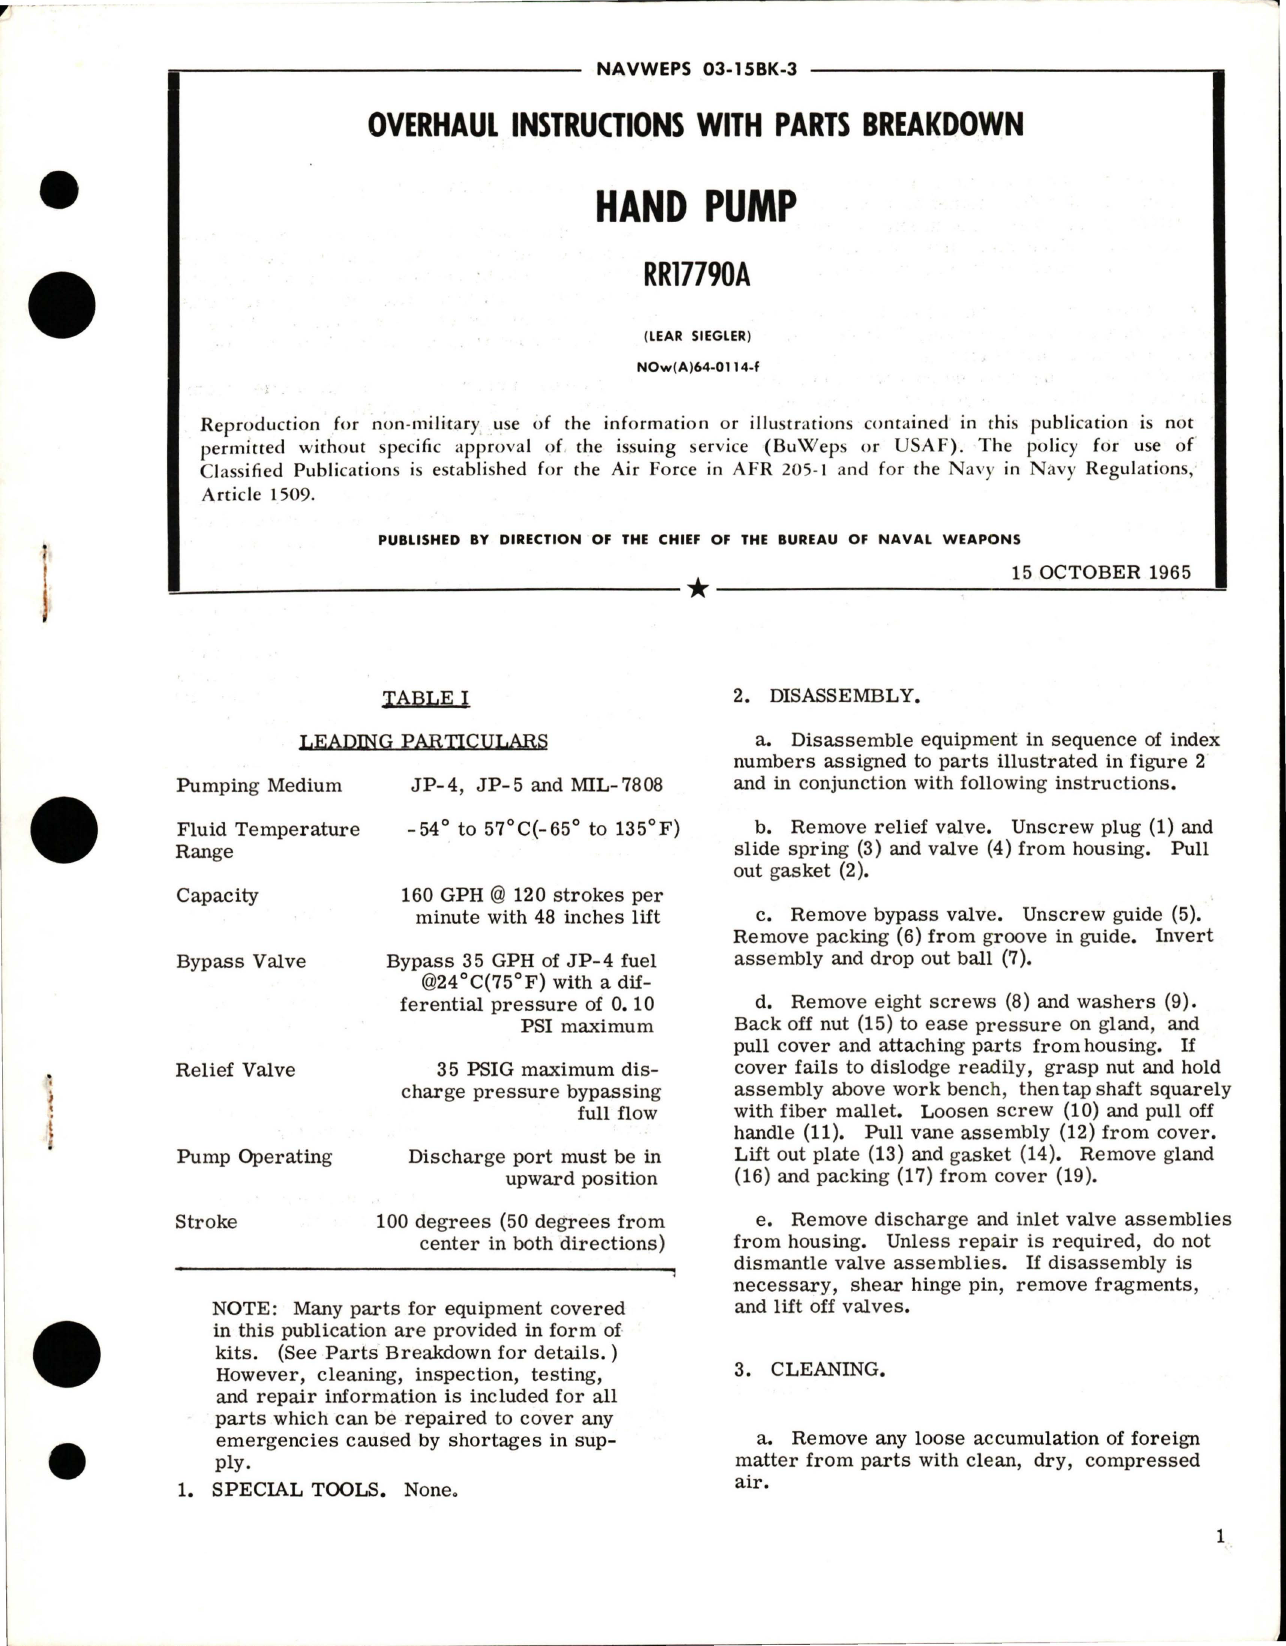 Sample page 1 from AirCorps Library document: Overhaul Instructions with Parts Breakdown for Hand Pump - RR17790A